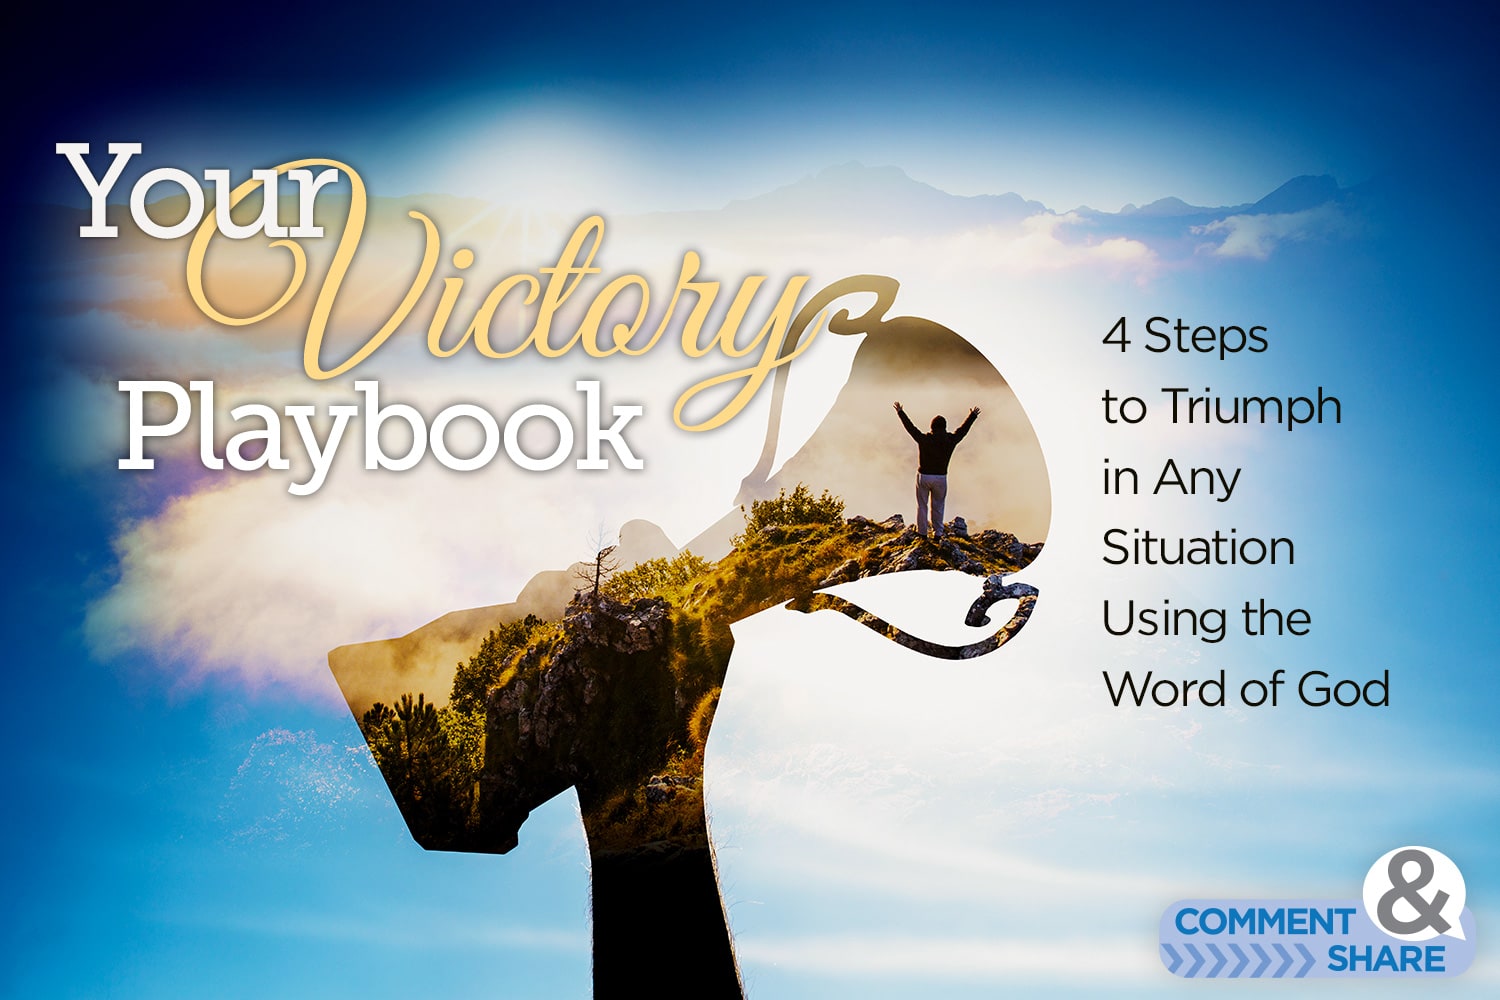 4 Steps to Triumph in Any Situation Using God's Word